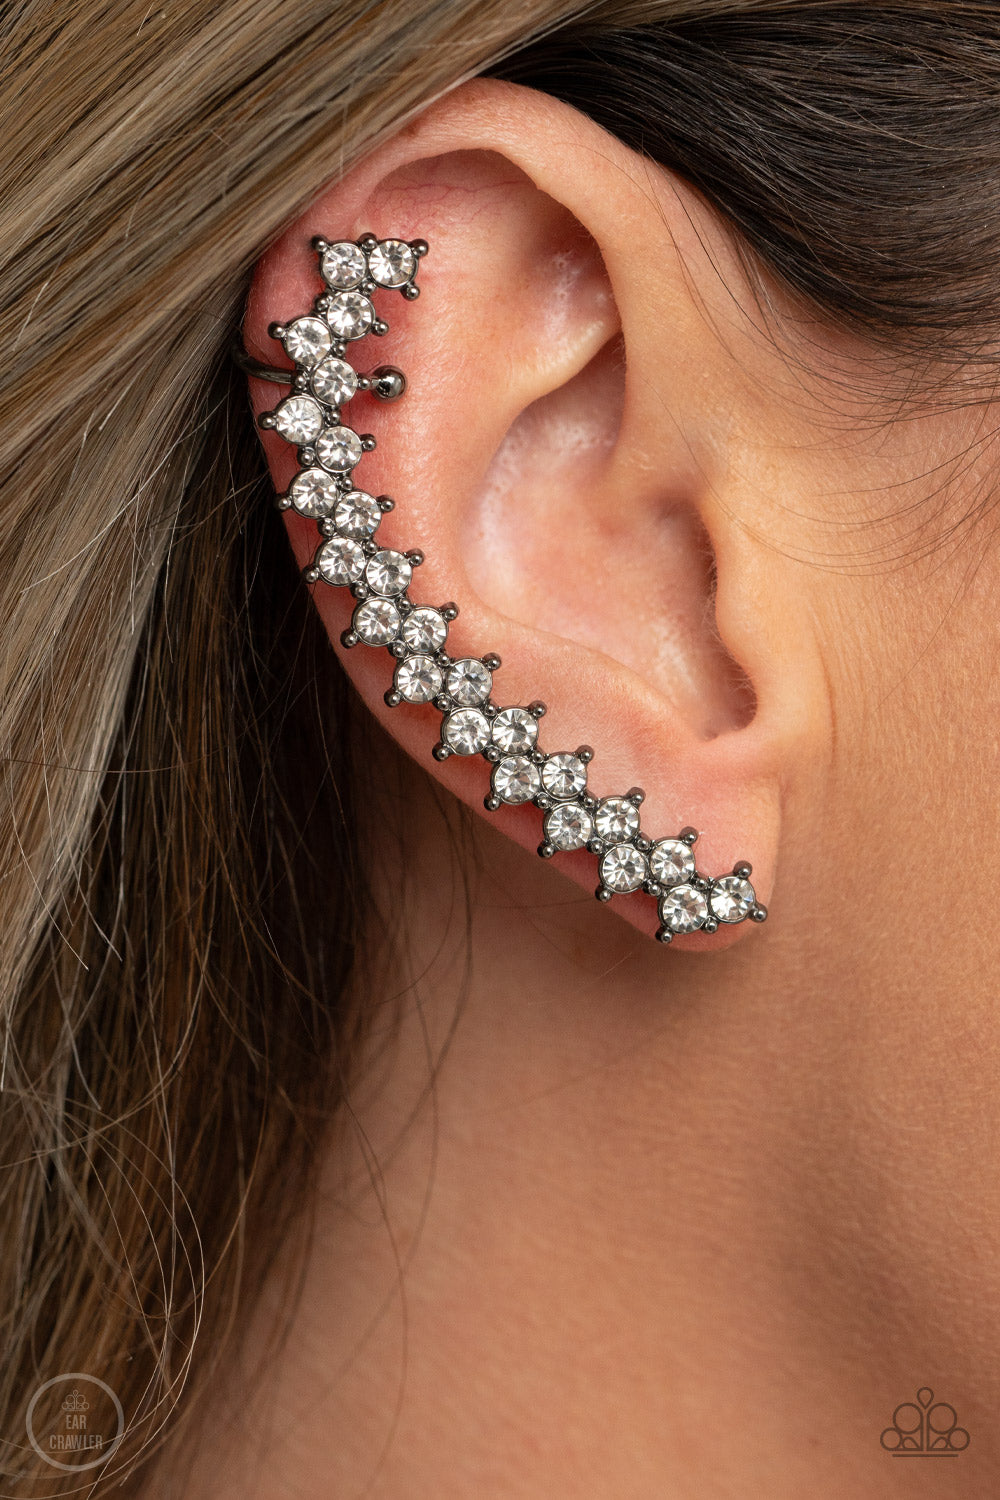 Did you know Paparazzi has different styles of earrings?!